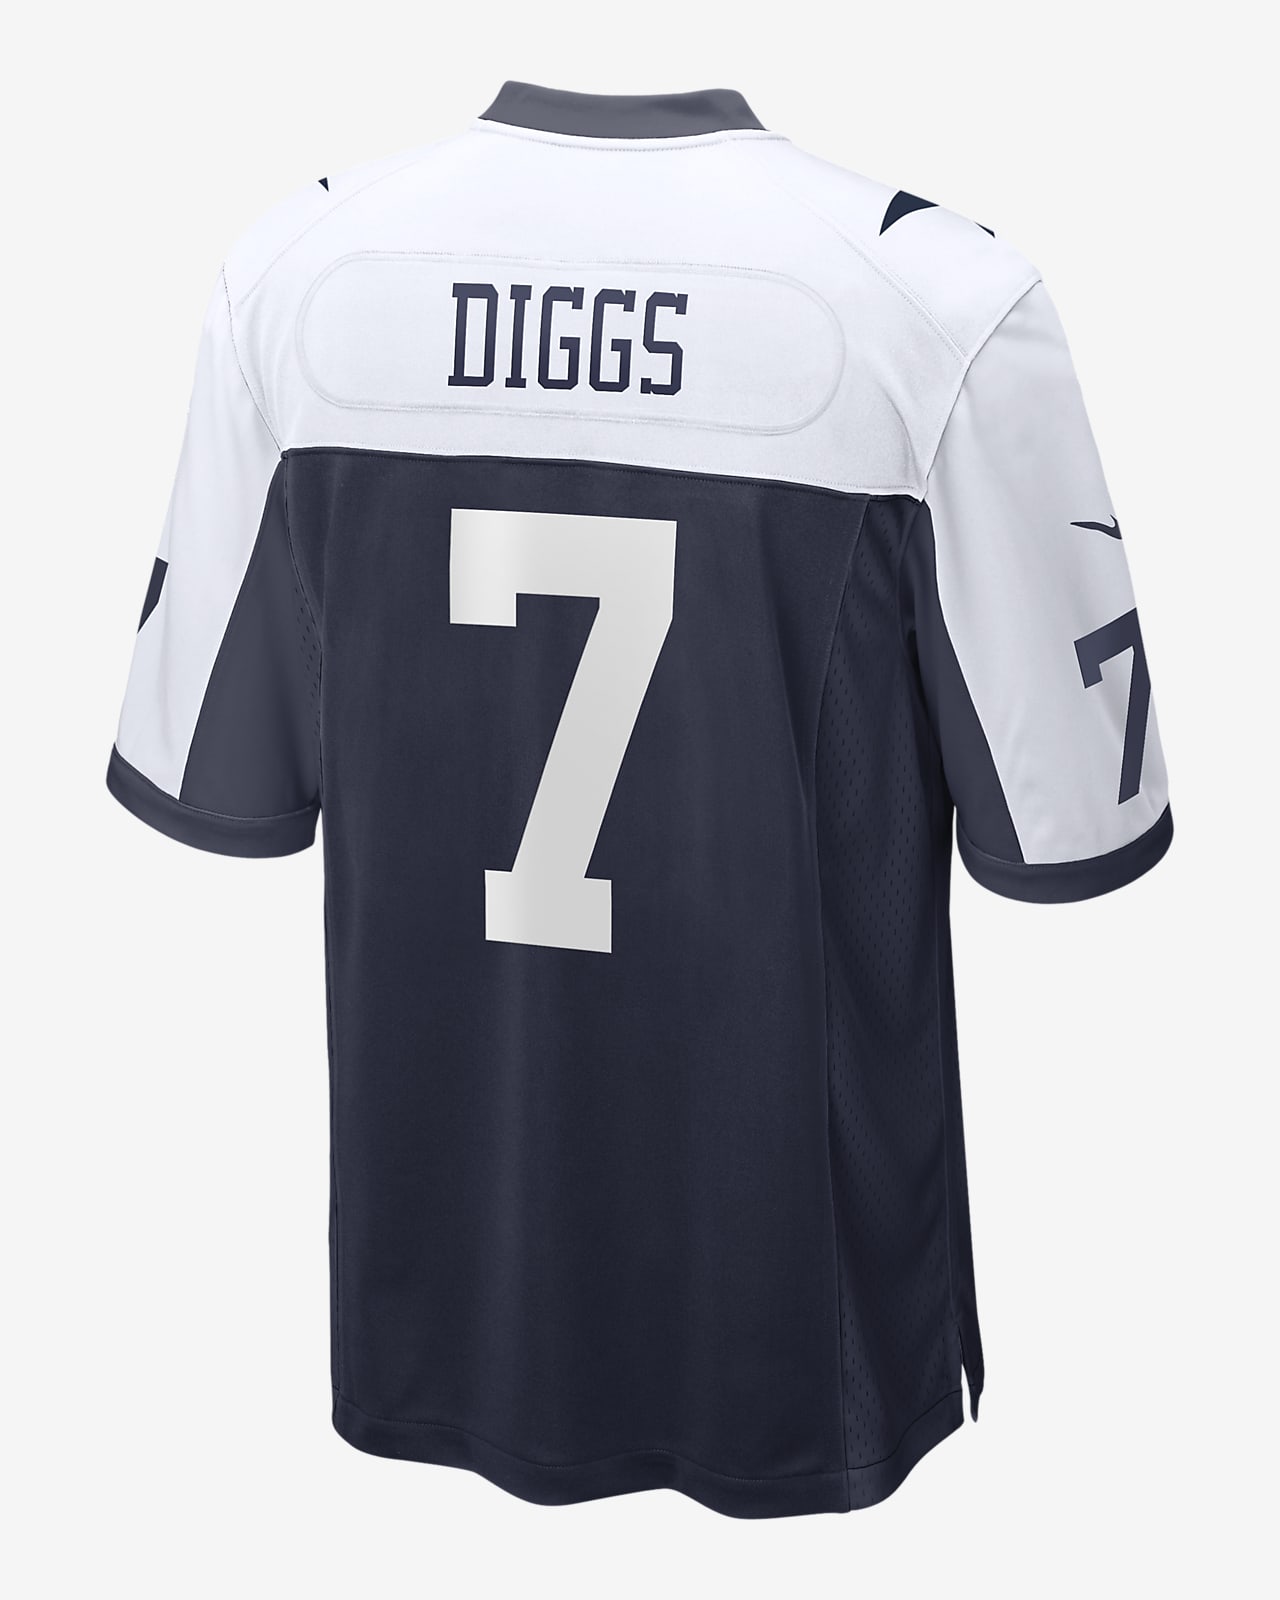 diggs white jersey